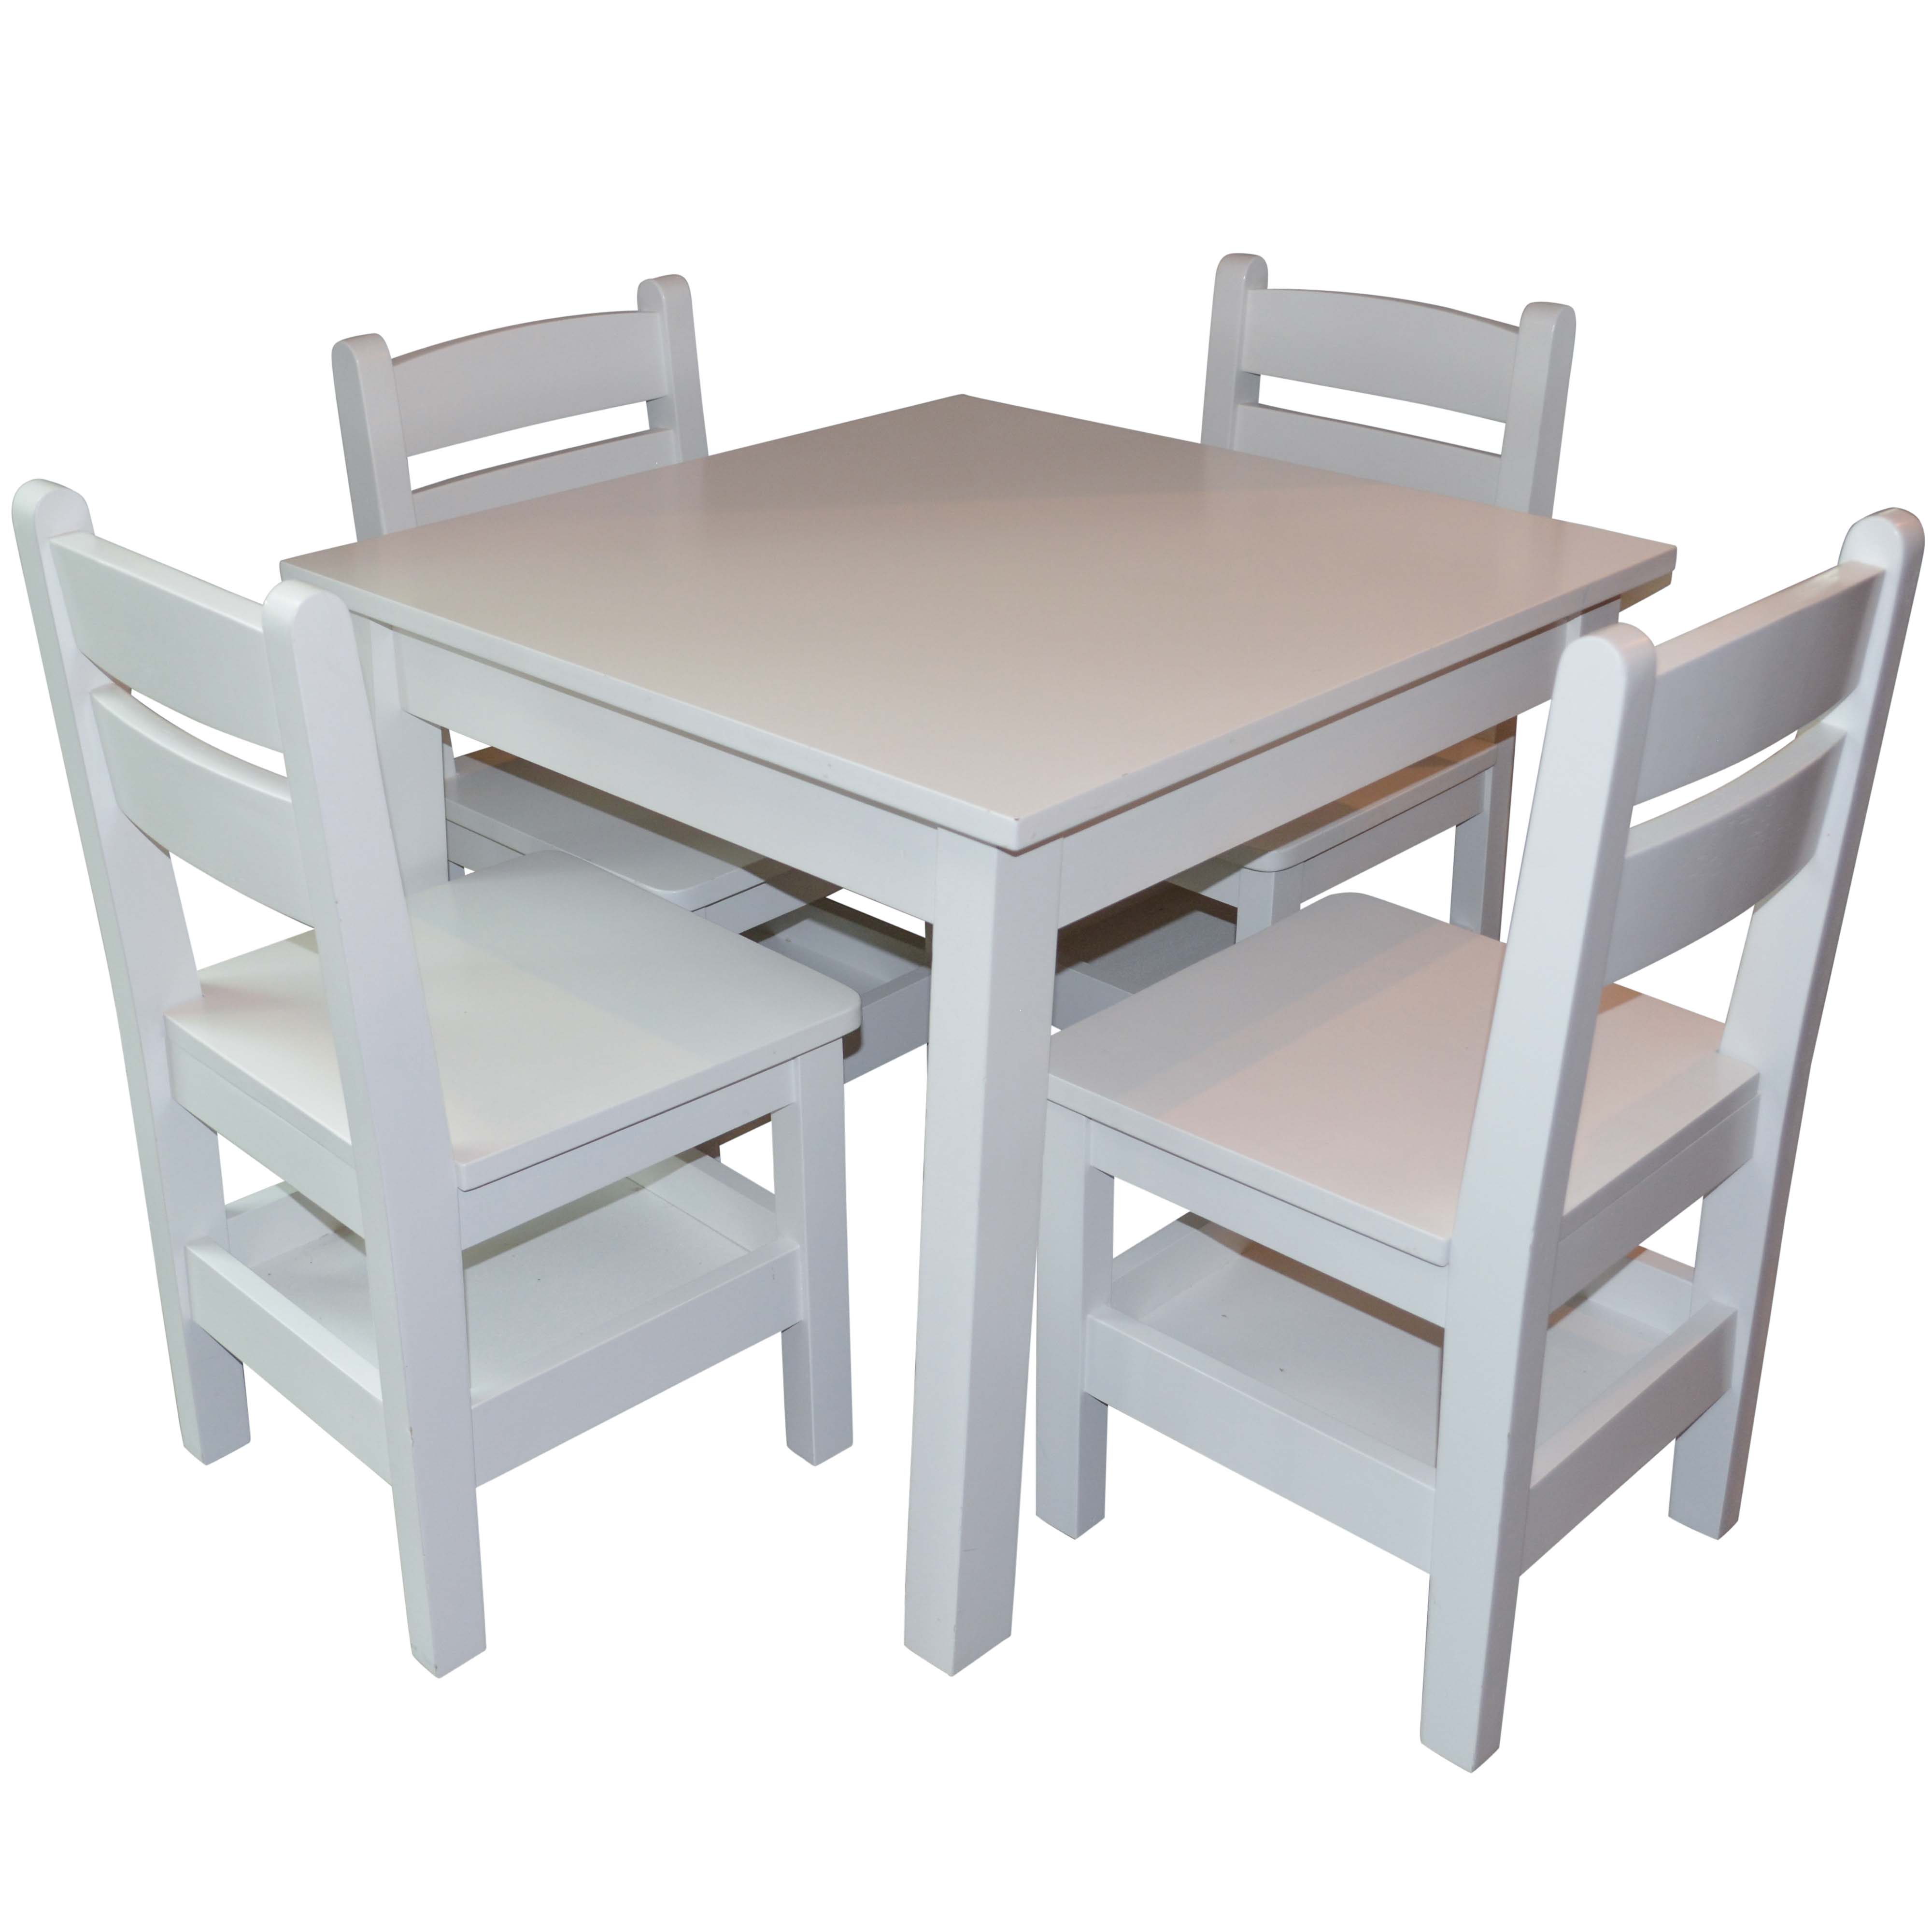 land of nod table and chairs